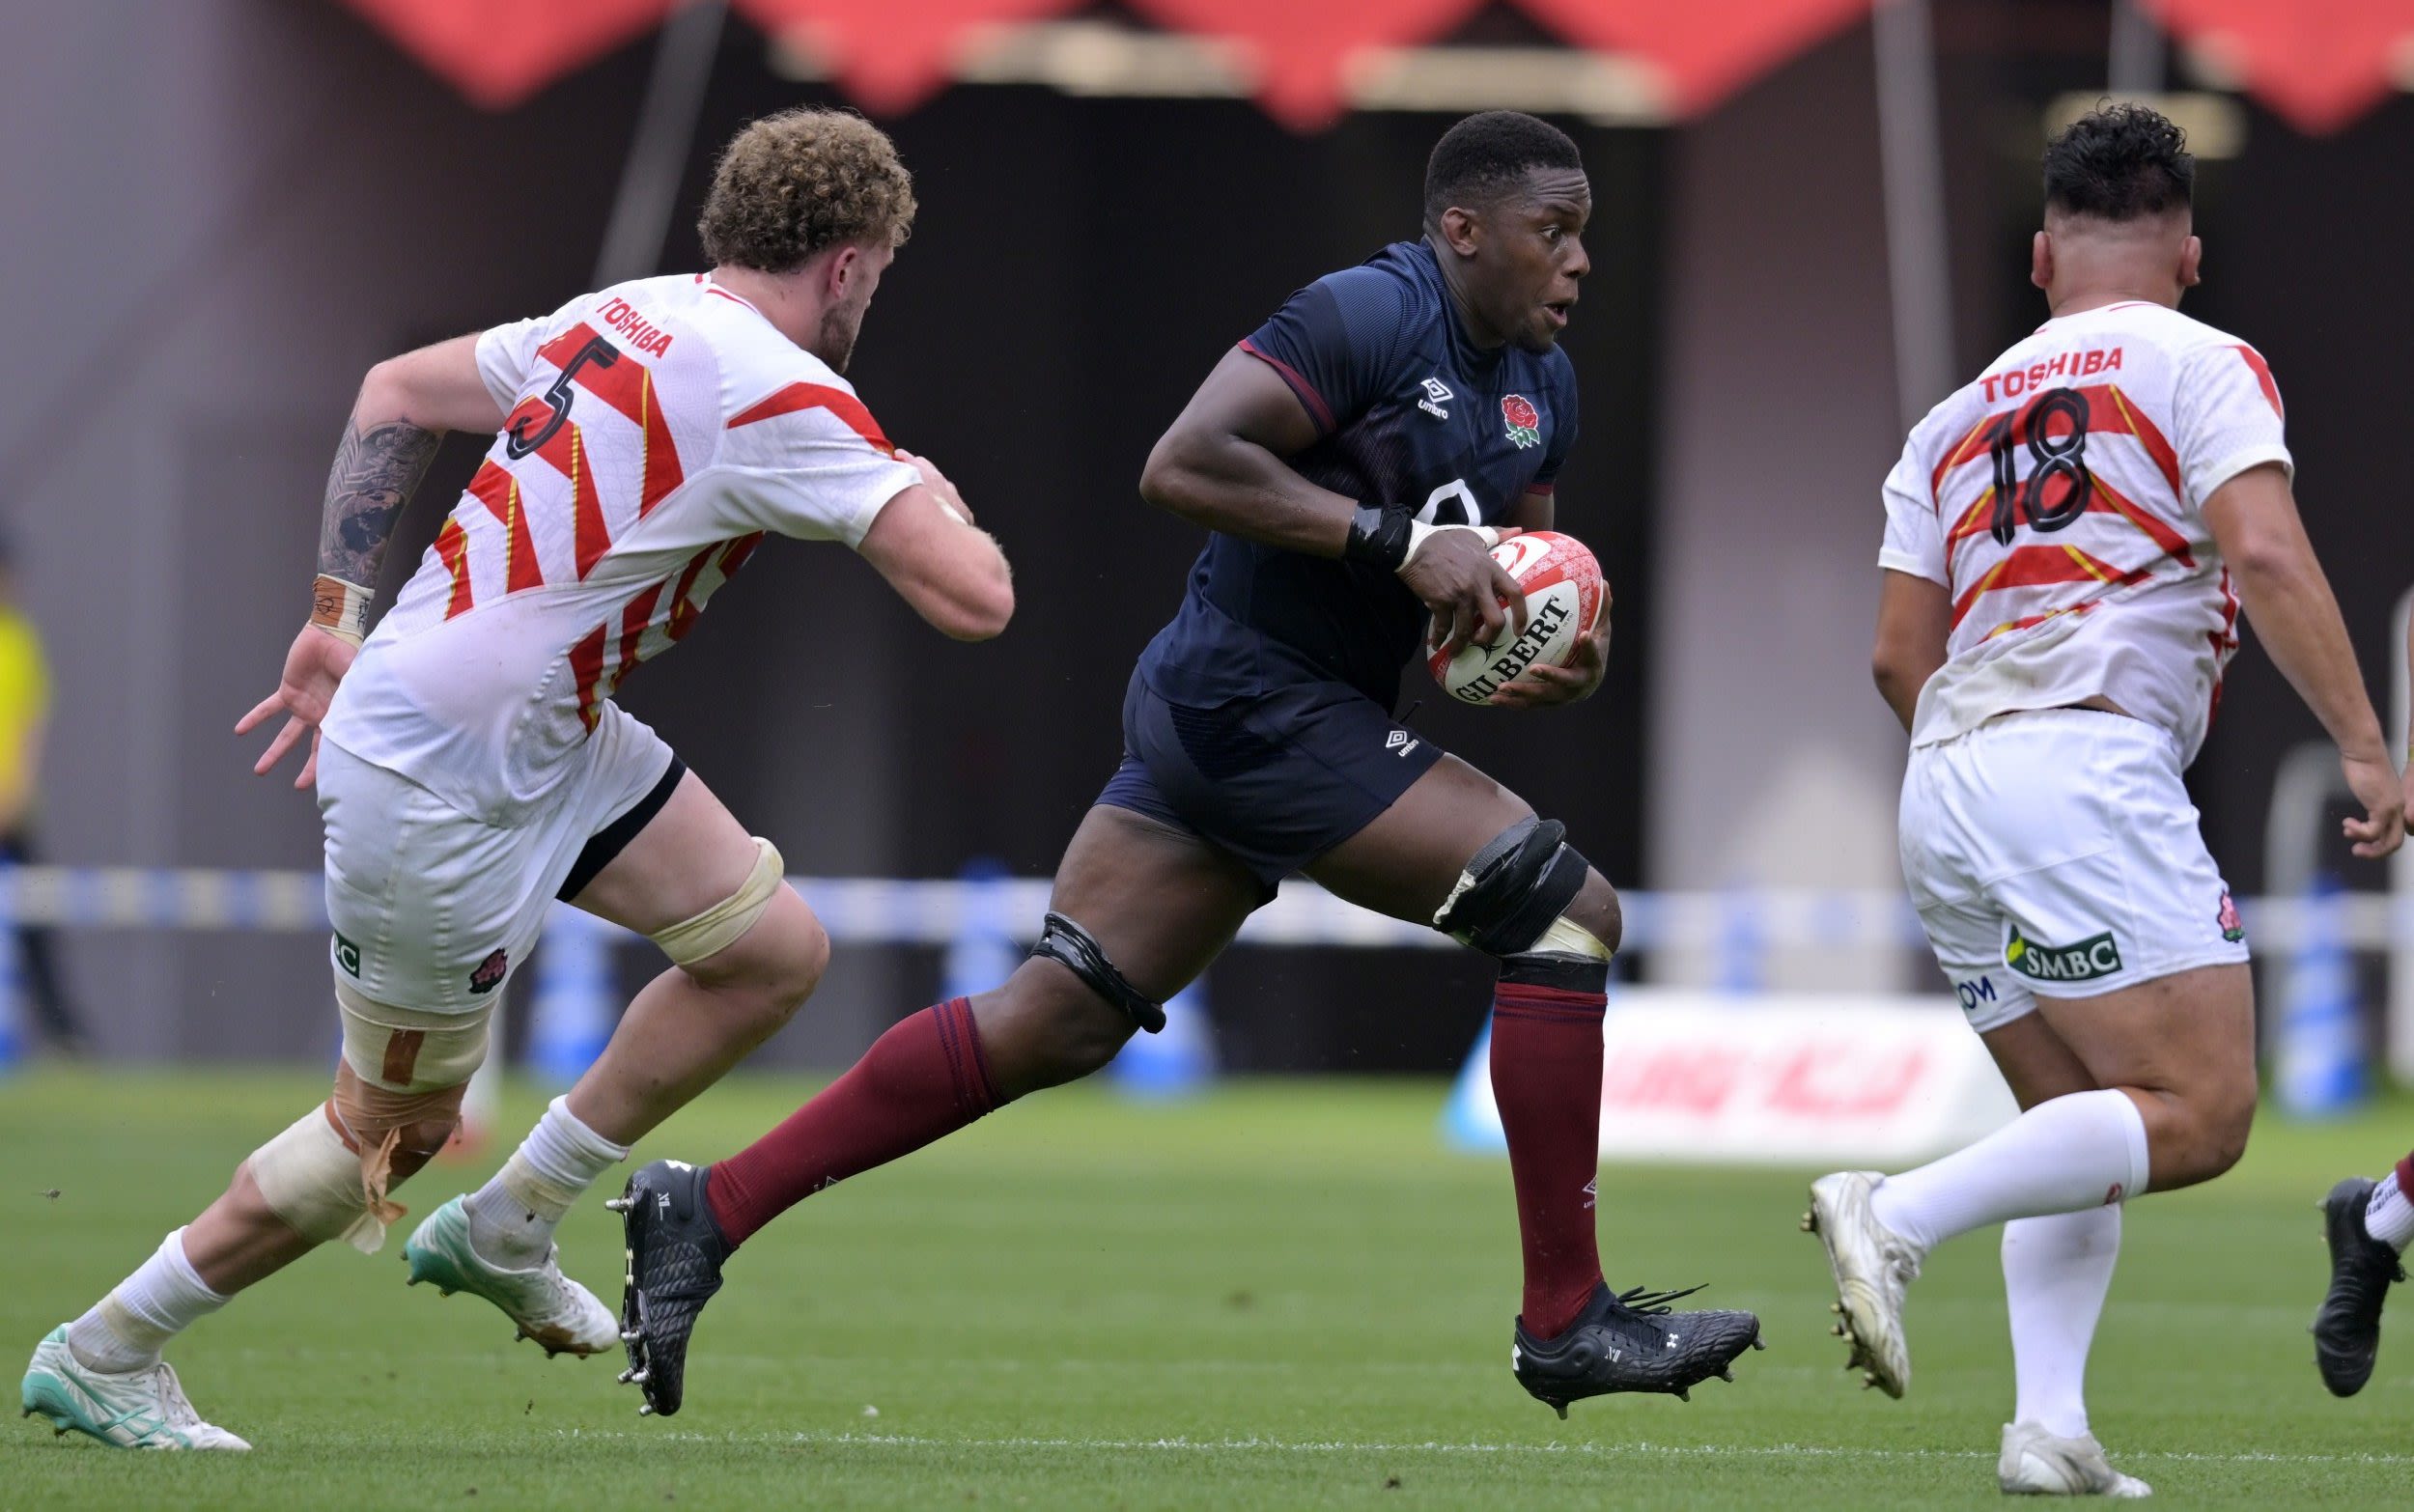 Maro Itoje has finally grown into a leader for England – and Steve Borthwick is delighted